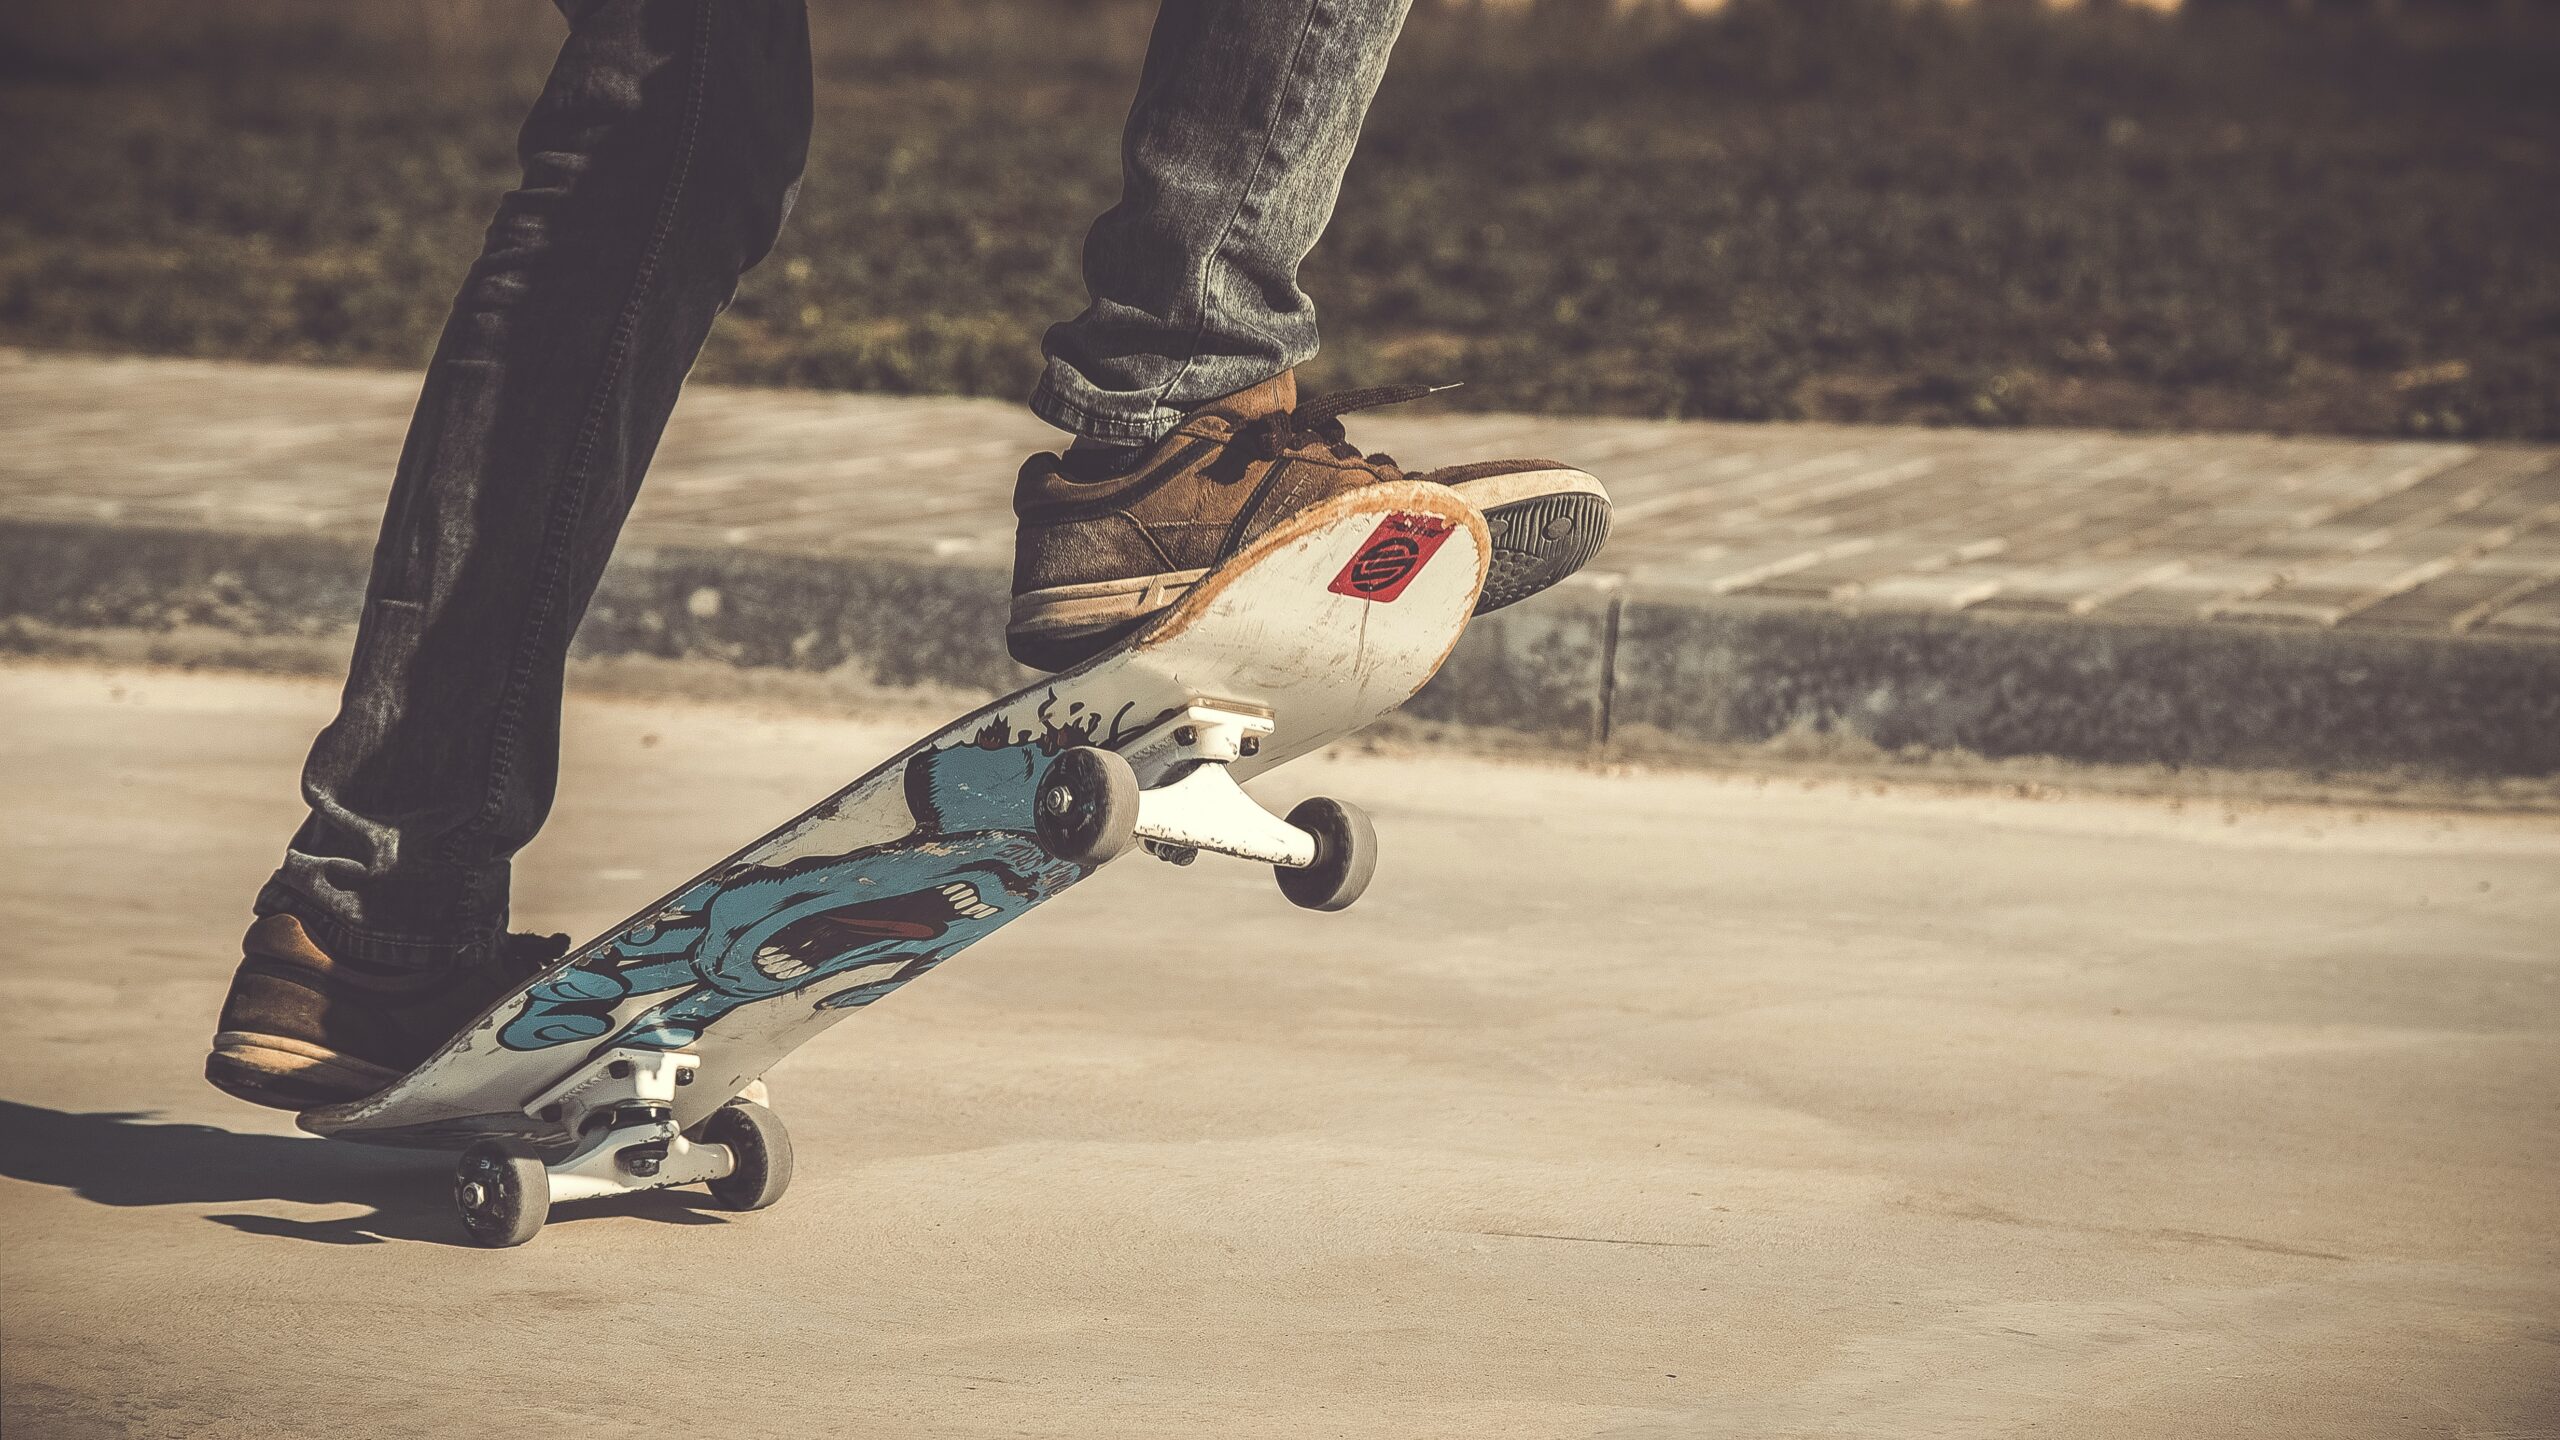 Can You Discuss The Role Of Body Posture In Skateboarding Control And Balance?